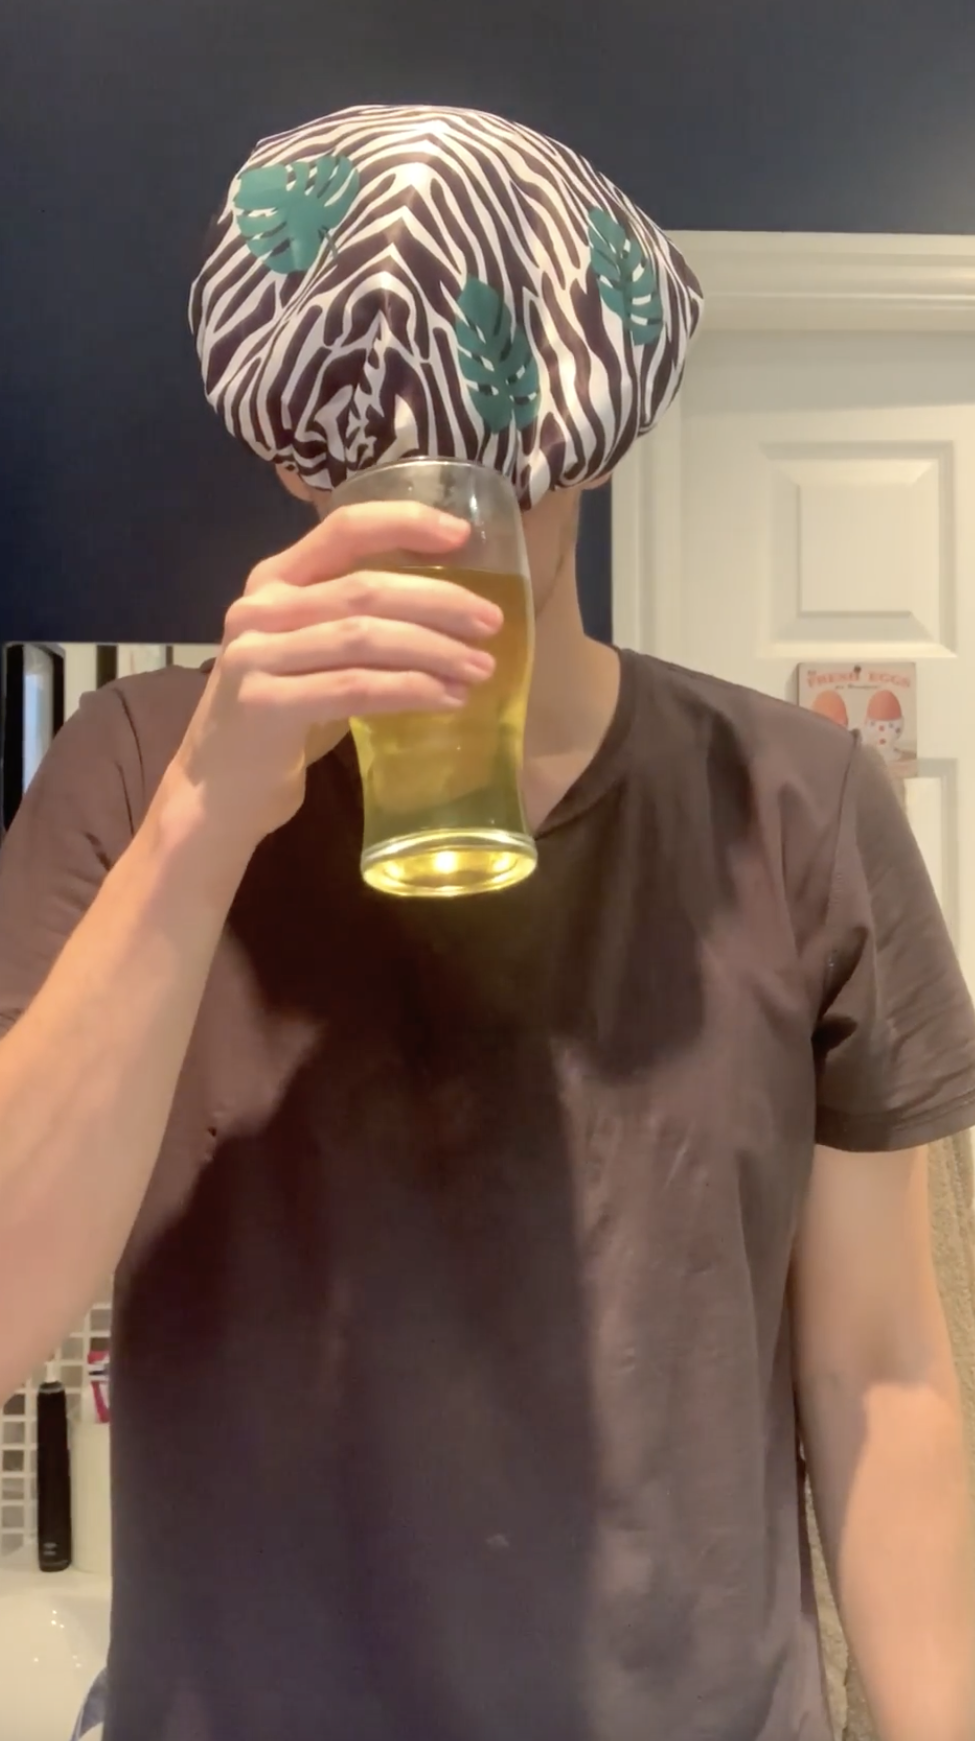 Slave Task, Part 2: Drinking my own piss